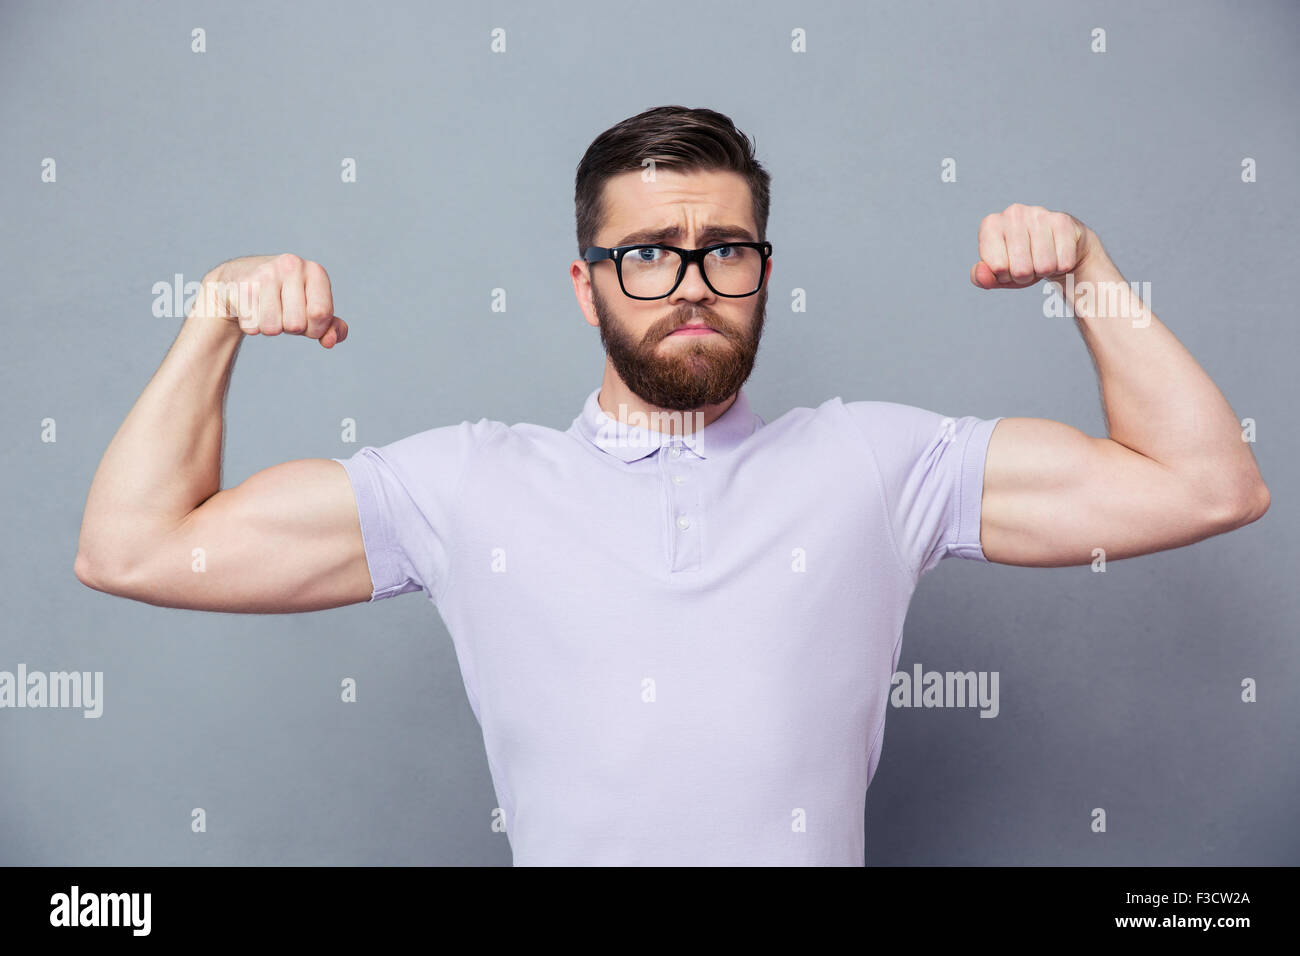 Portrait of a casual man in glasses showing his biceps over gray background Stock Photo